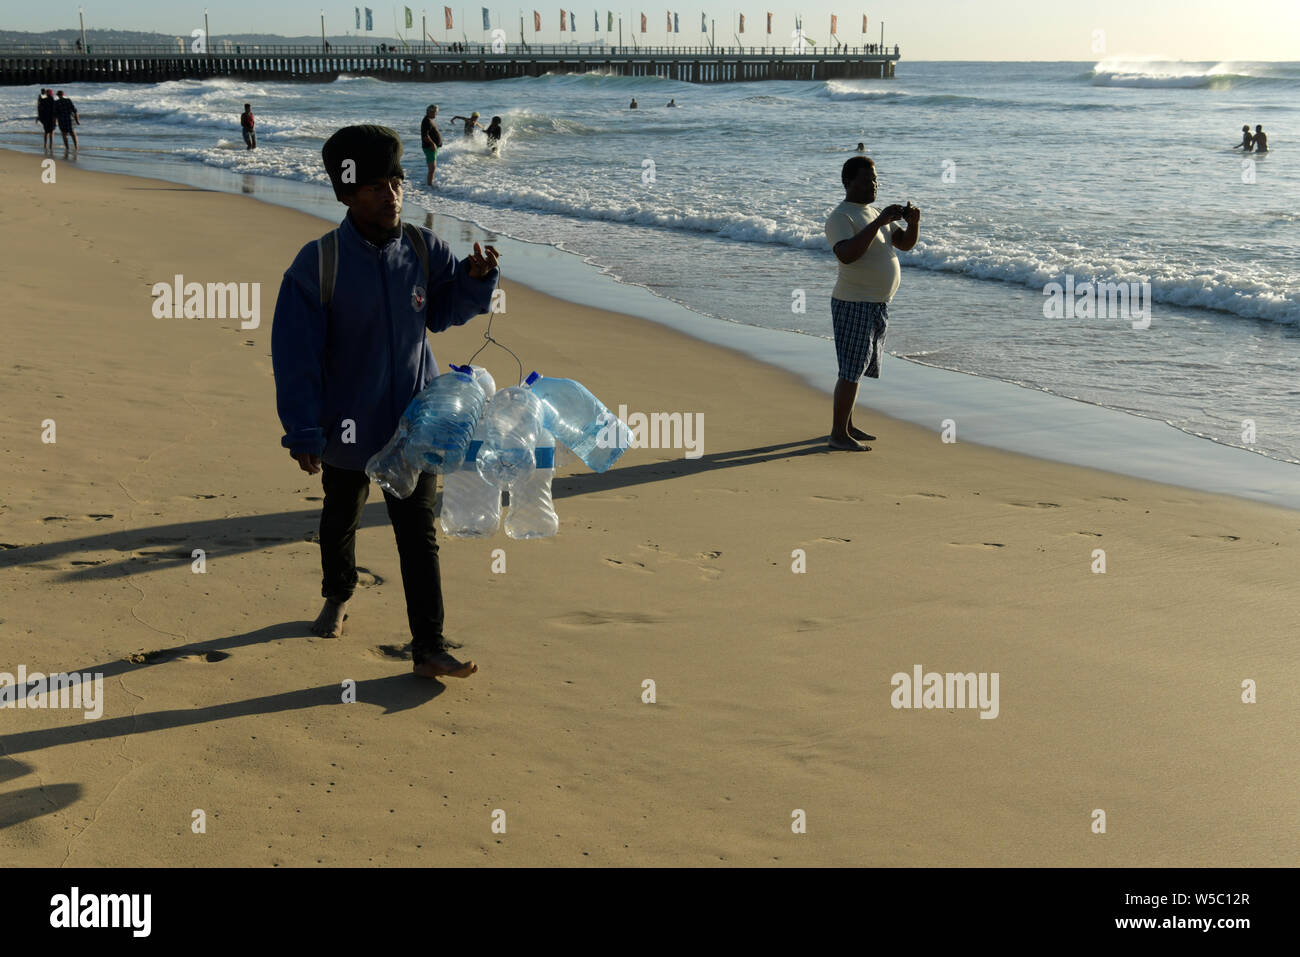 Durban, KwaZulu-Natal, South Africa, adult man, plastic bottle seller, collection of sea water for belief medicine, candid, people, beach, landscape Stock Photo